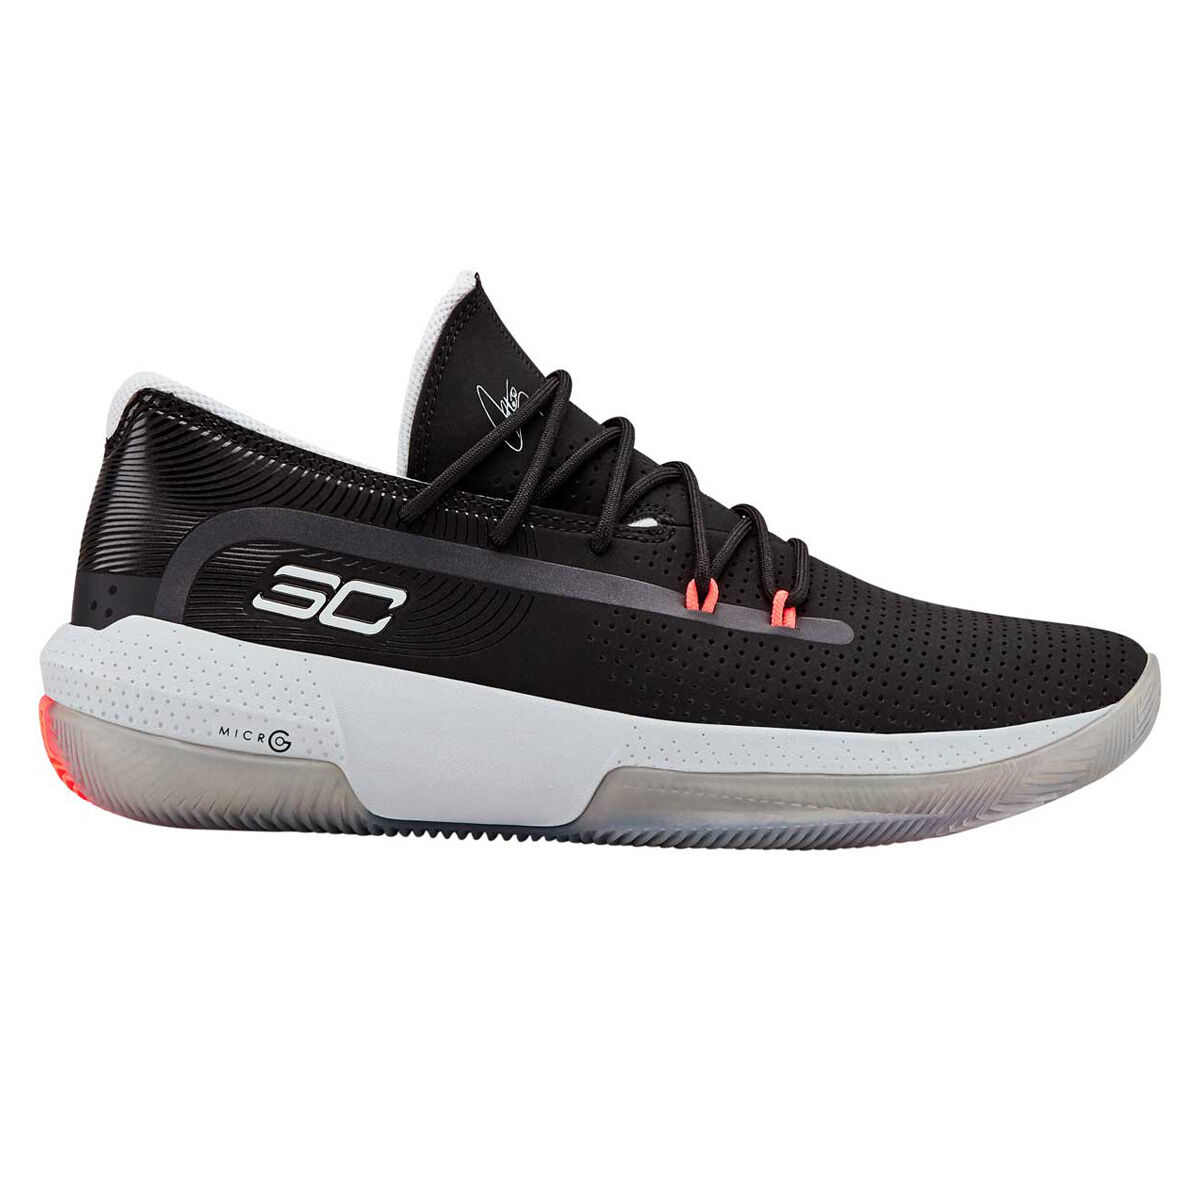 steph curry shoes 3zero